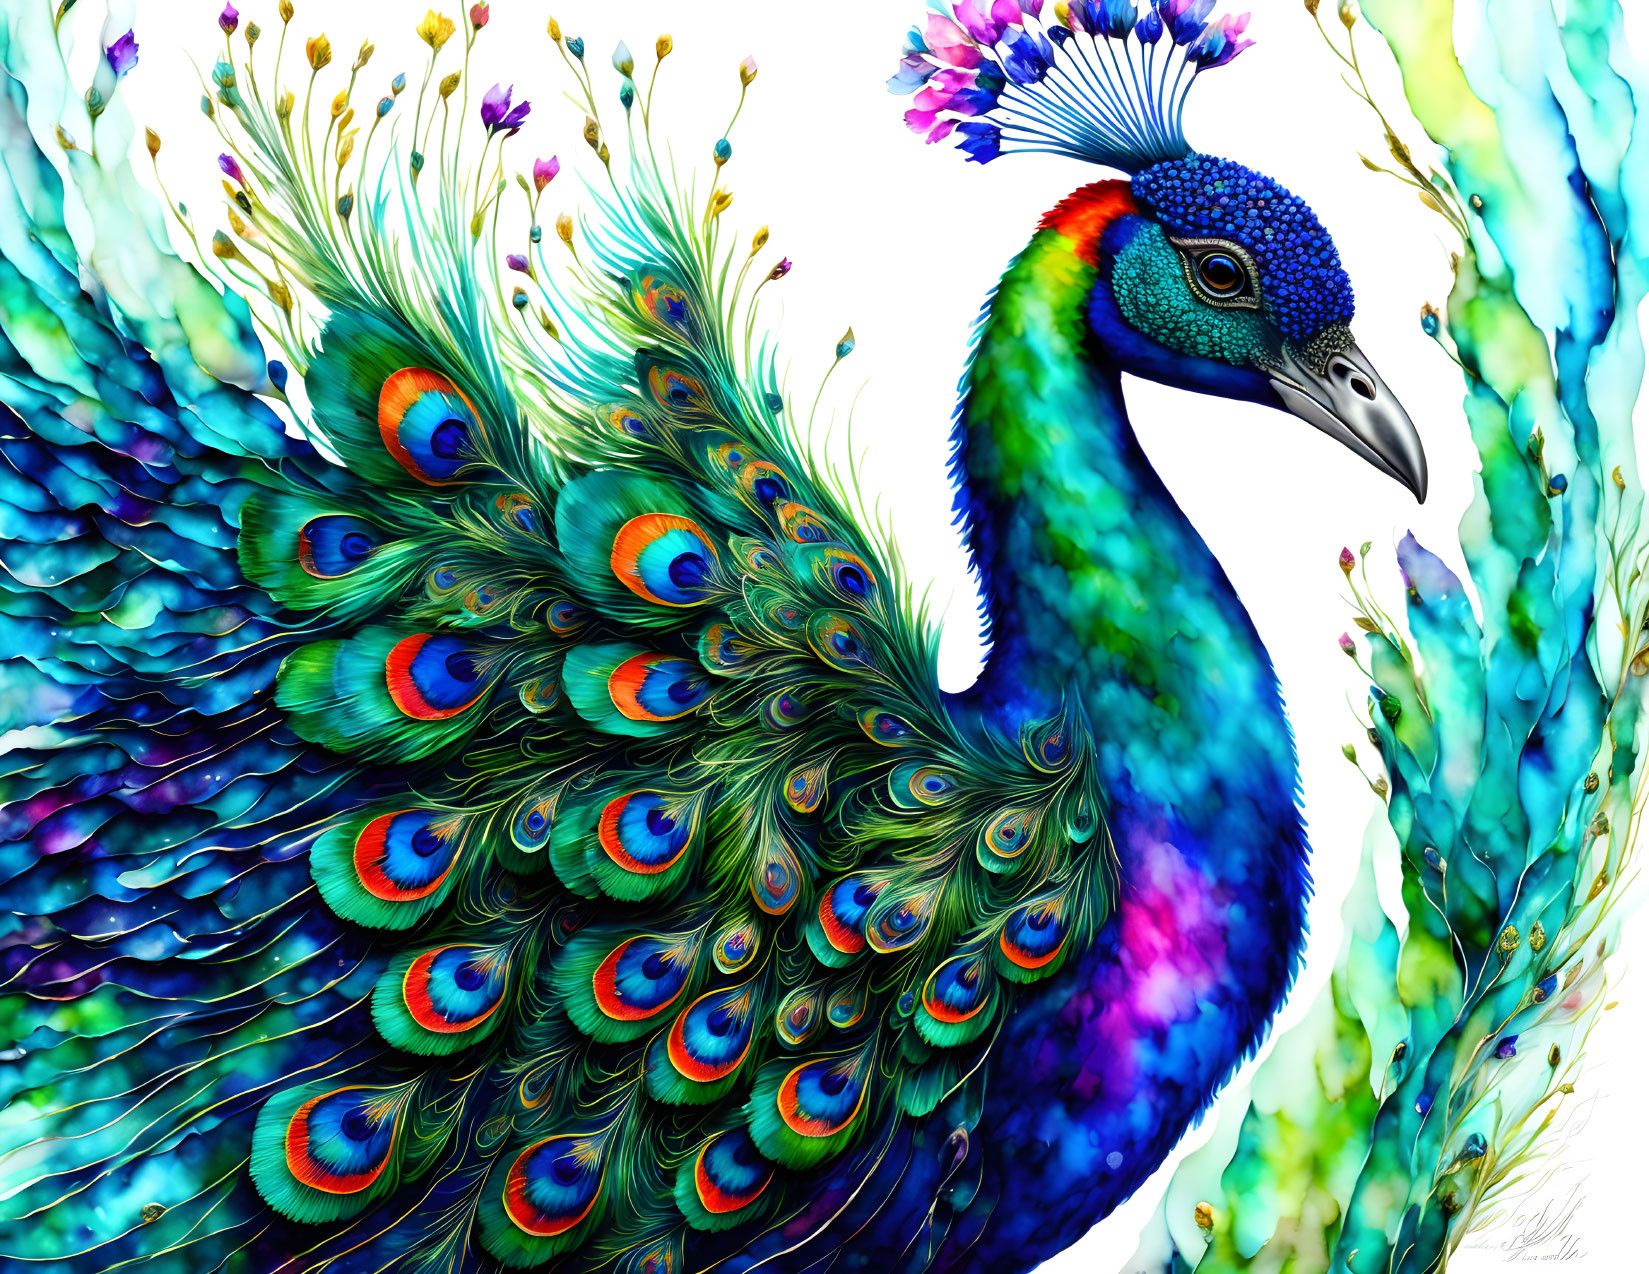 Colorful Peacock Illustration with Eye Patterned Feathers and Stylized Flora